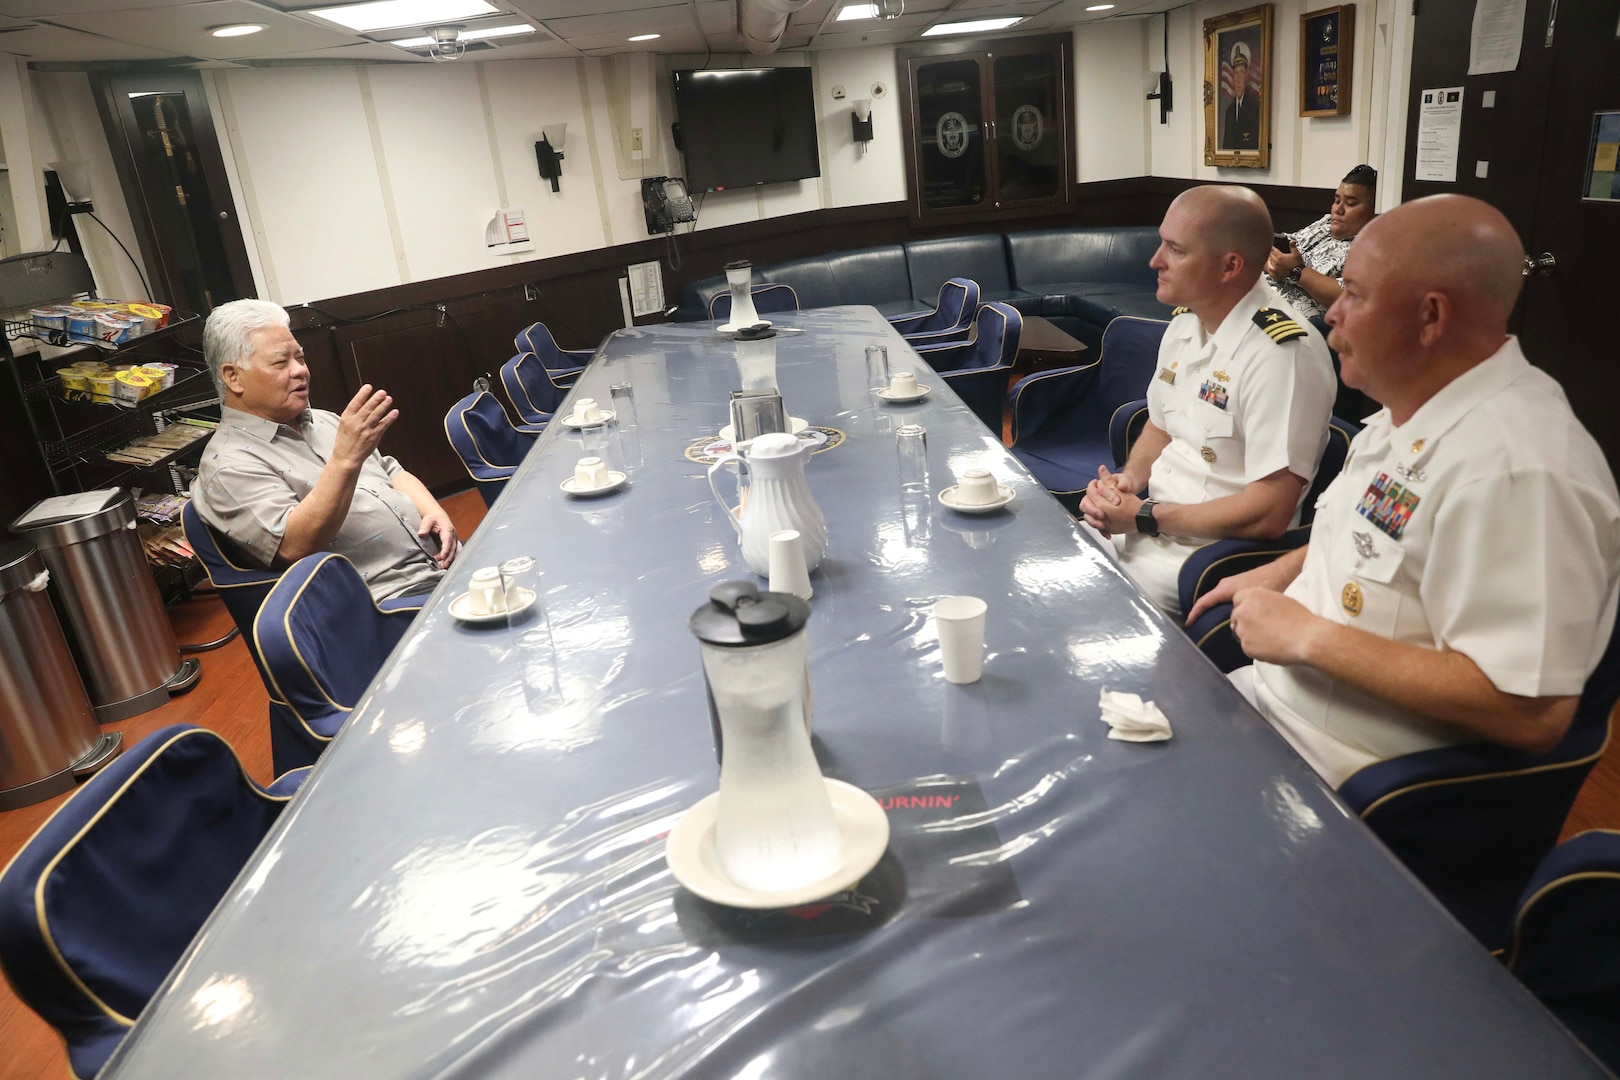 Arnold Palacios (left), governor of the Commonwealth of the Northern Mariana Islands, meets with Cmdr. Leif Gunderson (center), commanding officer of the Arleigh Burke-class guided-missile destroyer USS Milius (DDG 69), and Command Master Chief Troy Bojorquiz during a scheduled port visit. Milius is assigned to Commander, Task Force 71/Destroyer Squadron (DESRON) 15, the Navy’s largest forward-deployed DESRON and the U.S. 7th Fleet’s principal surface force.